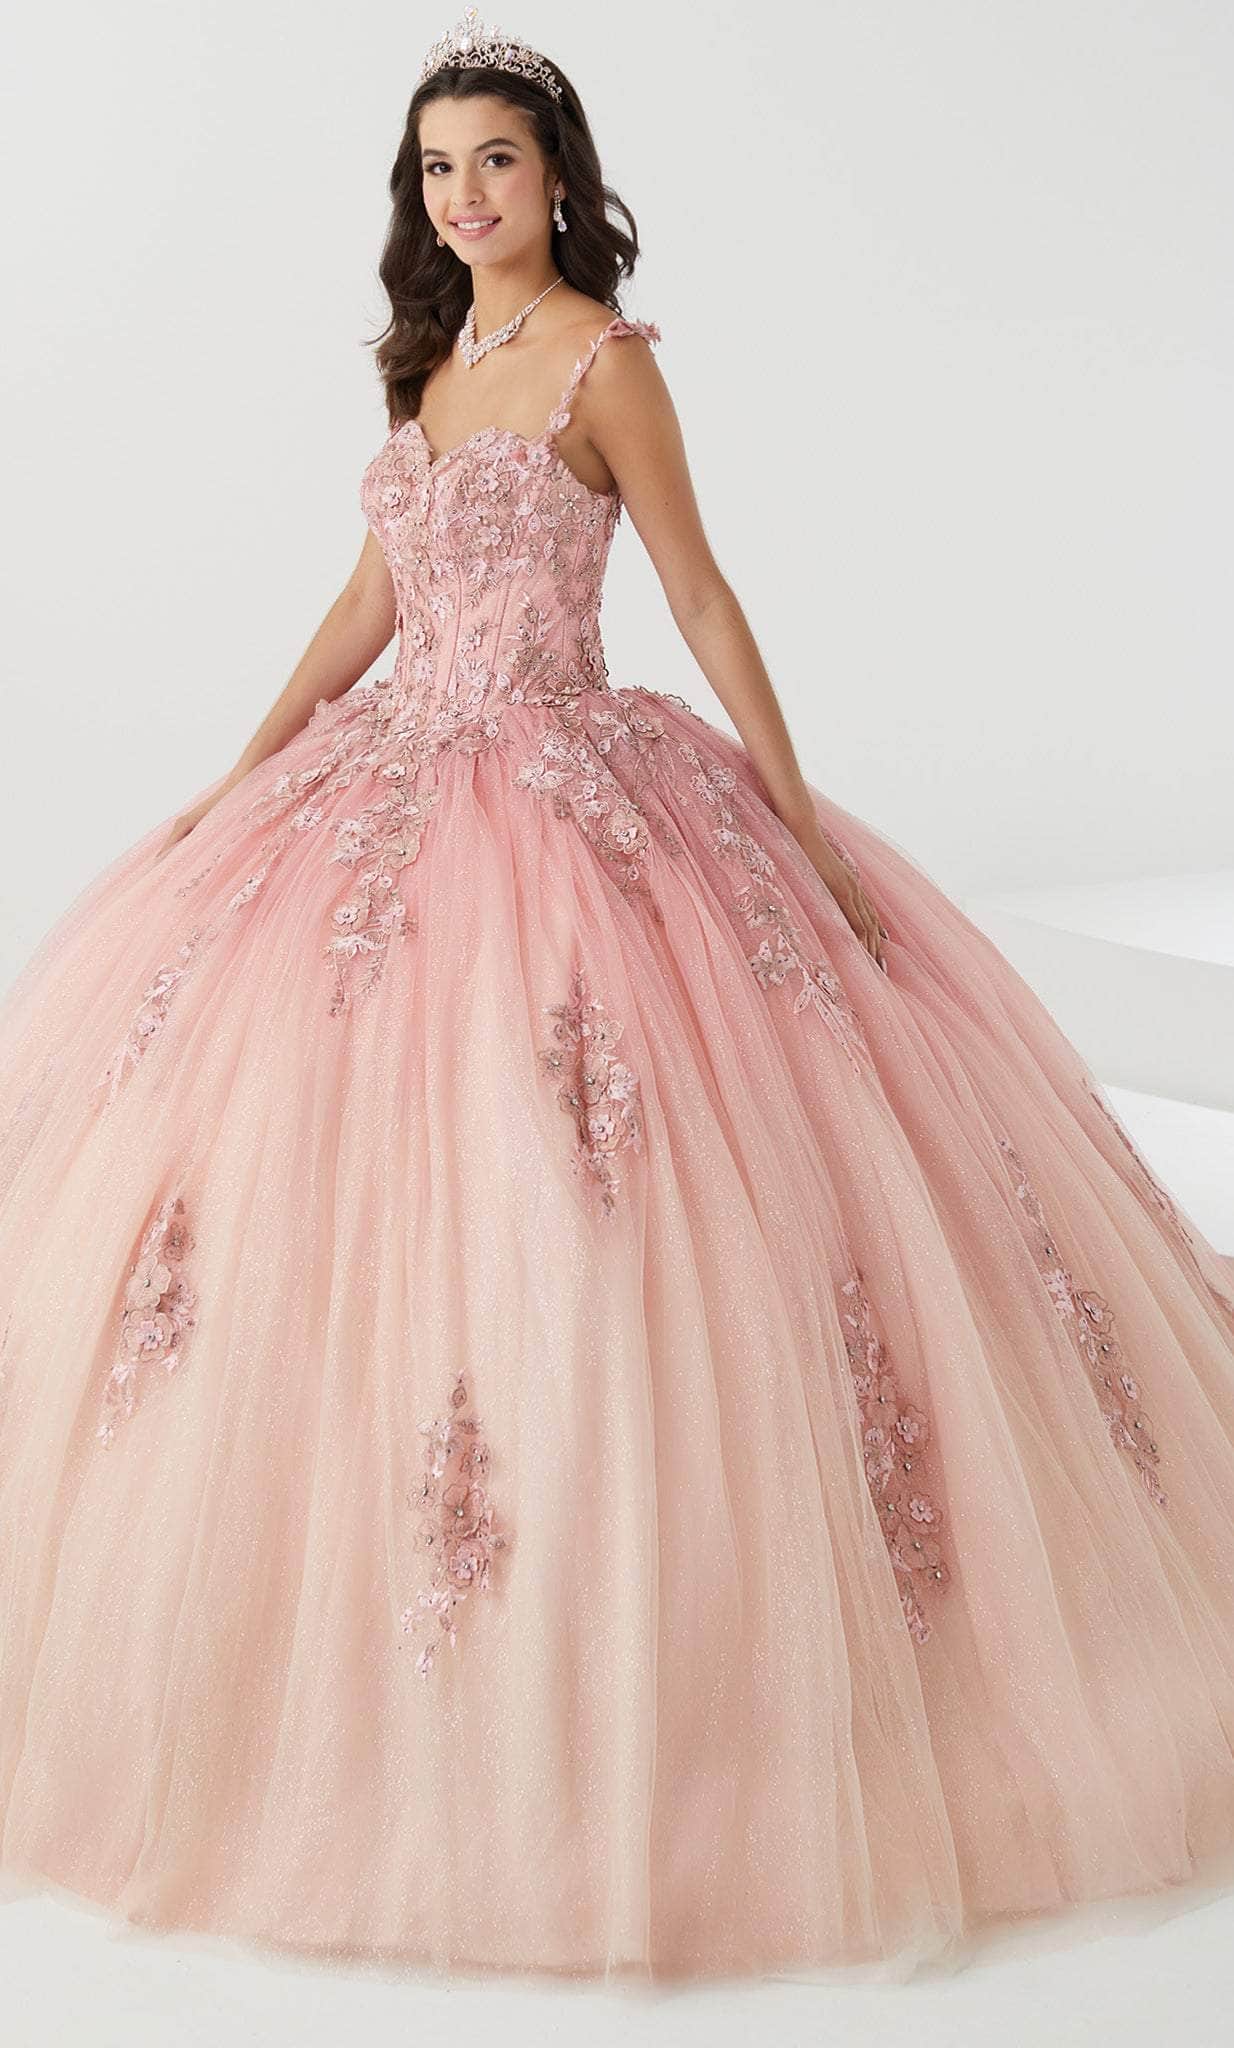 Image of Fiesta Gowns 56470 - Corseted Floral Princess Ballgown